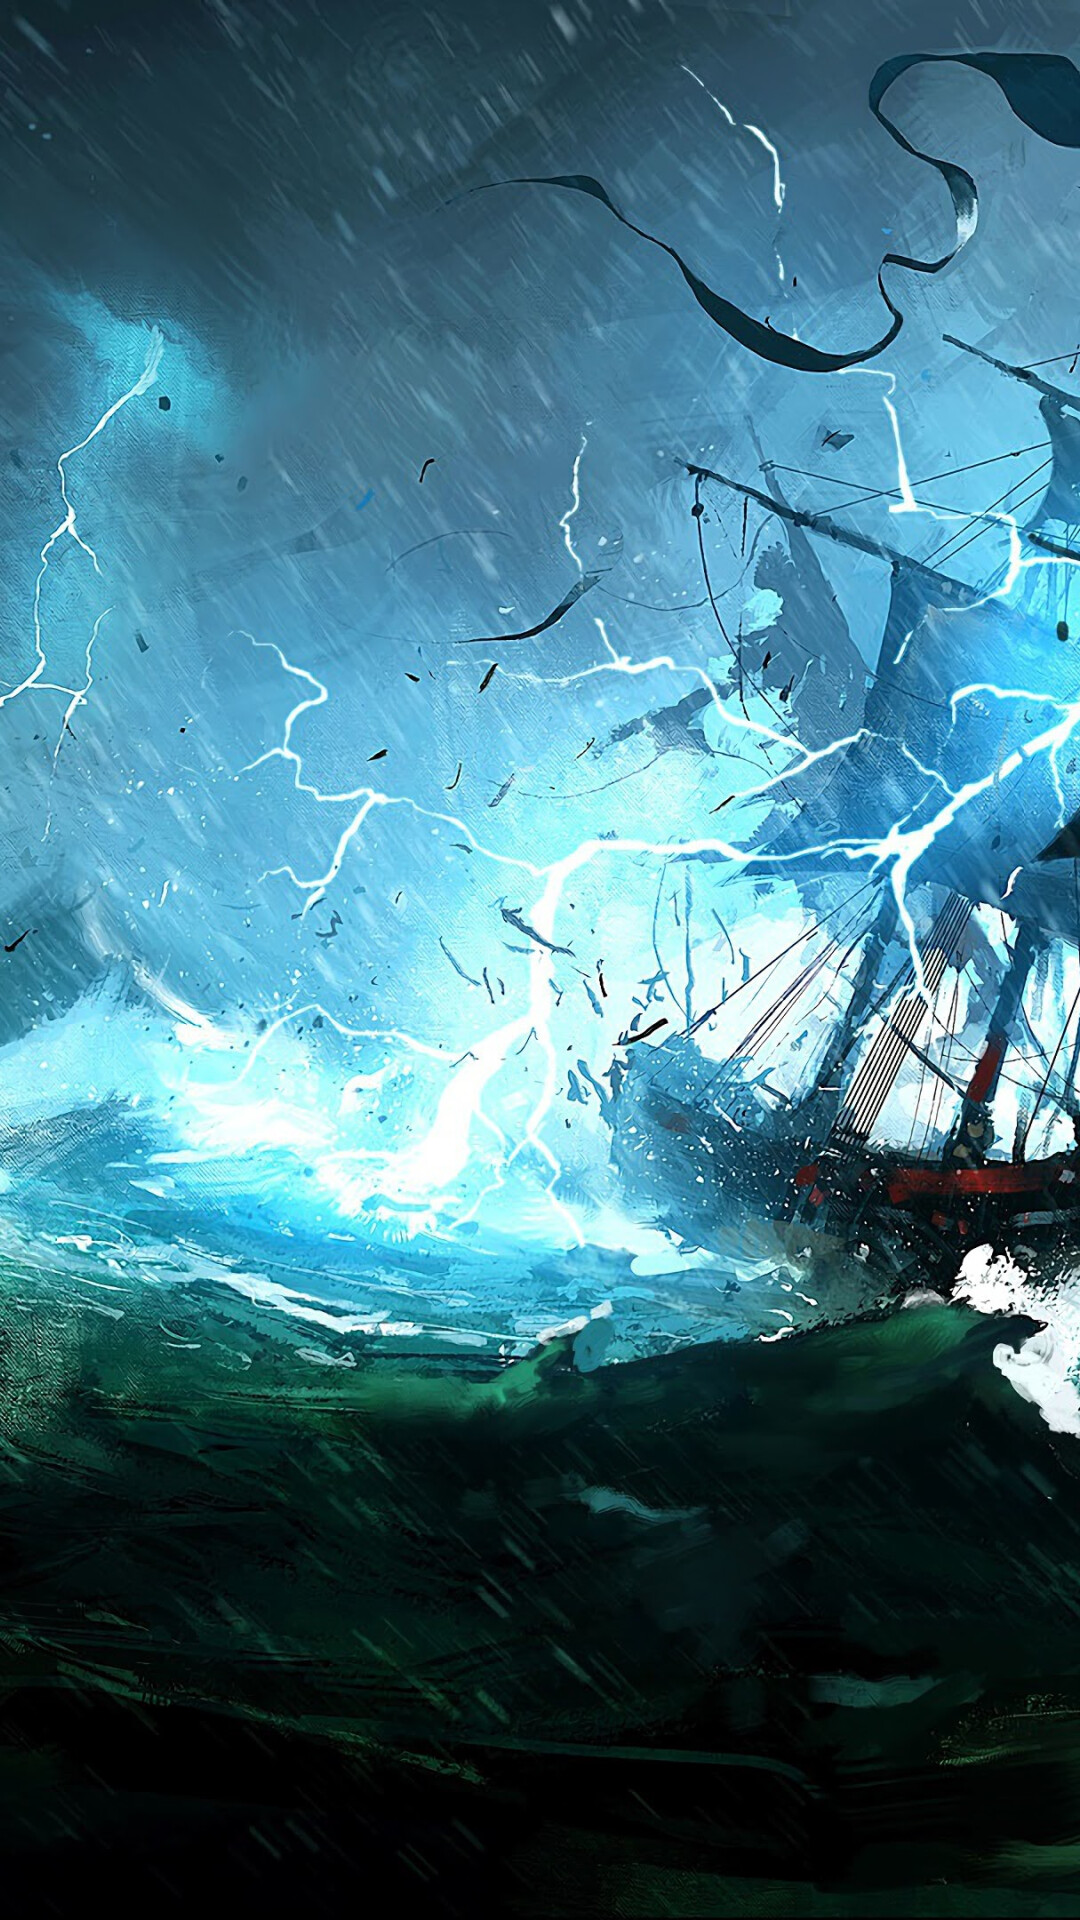 Ghost Ship: Used as a cautionary about the dangers of the sea. 1080x1920 Full HD Wallpaper.